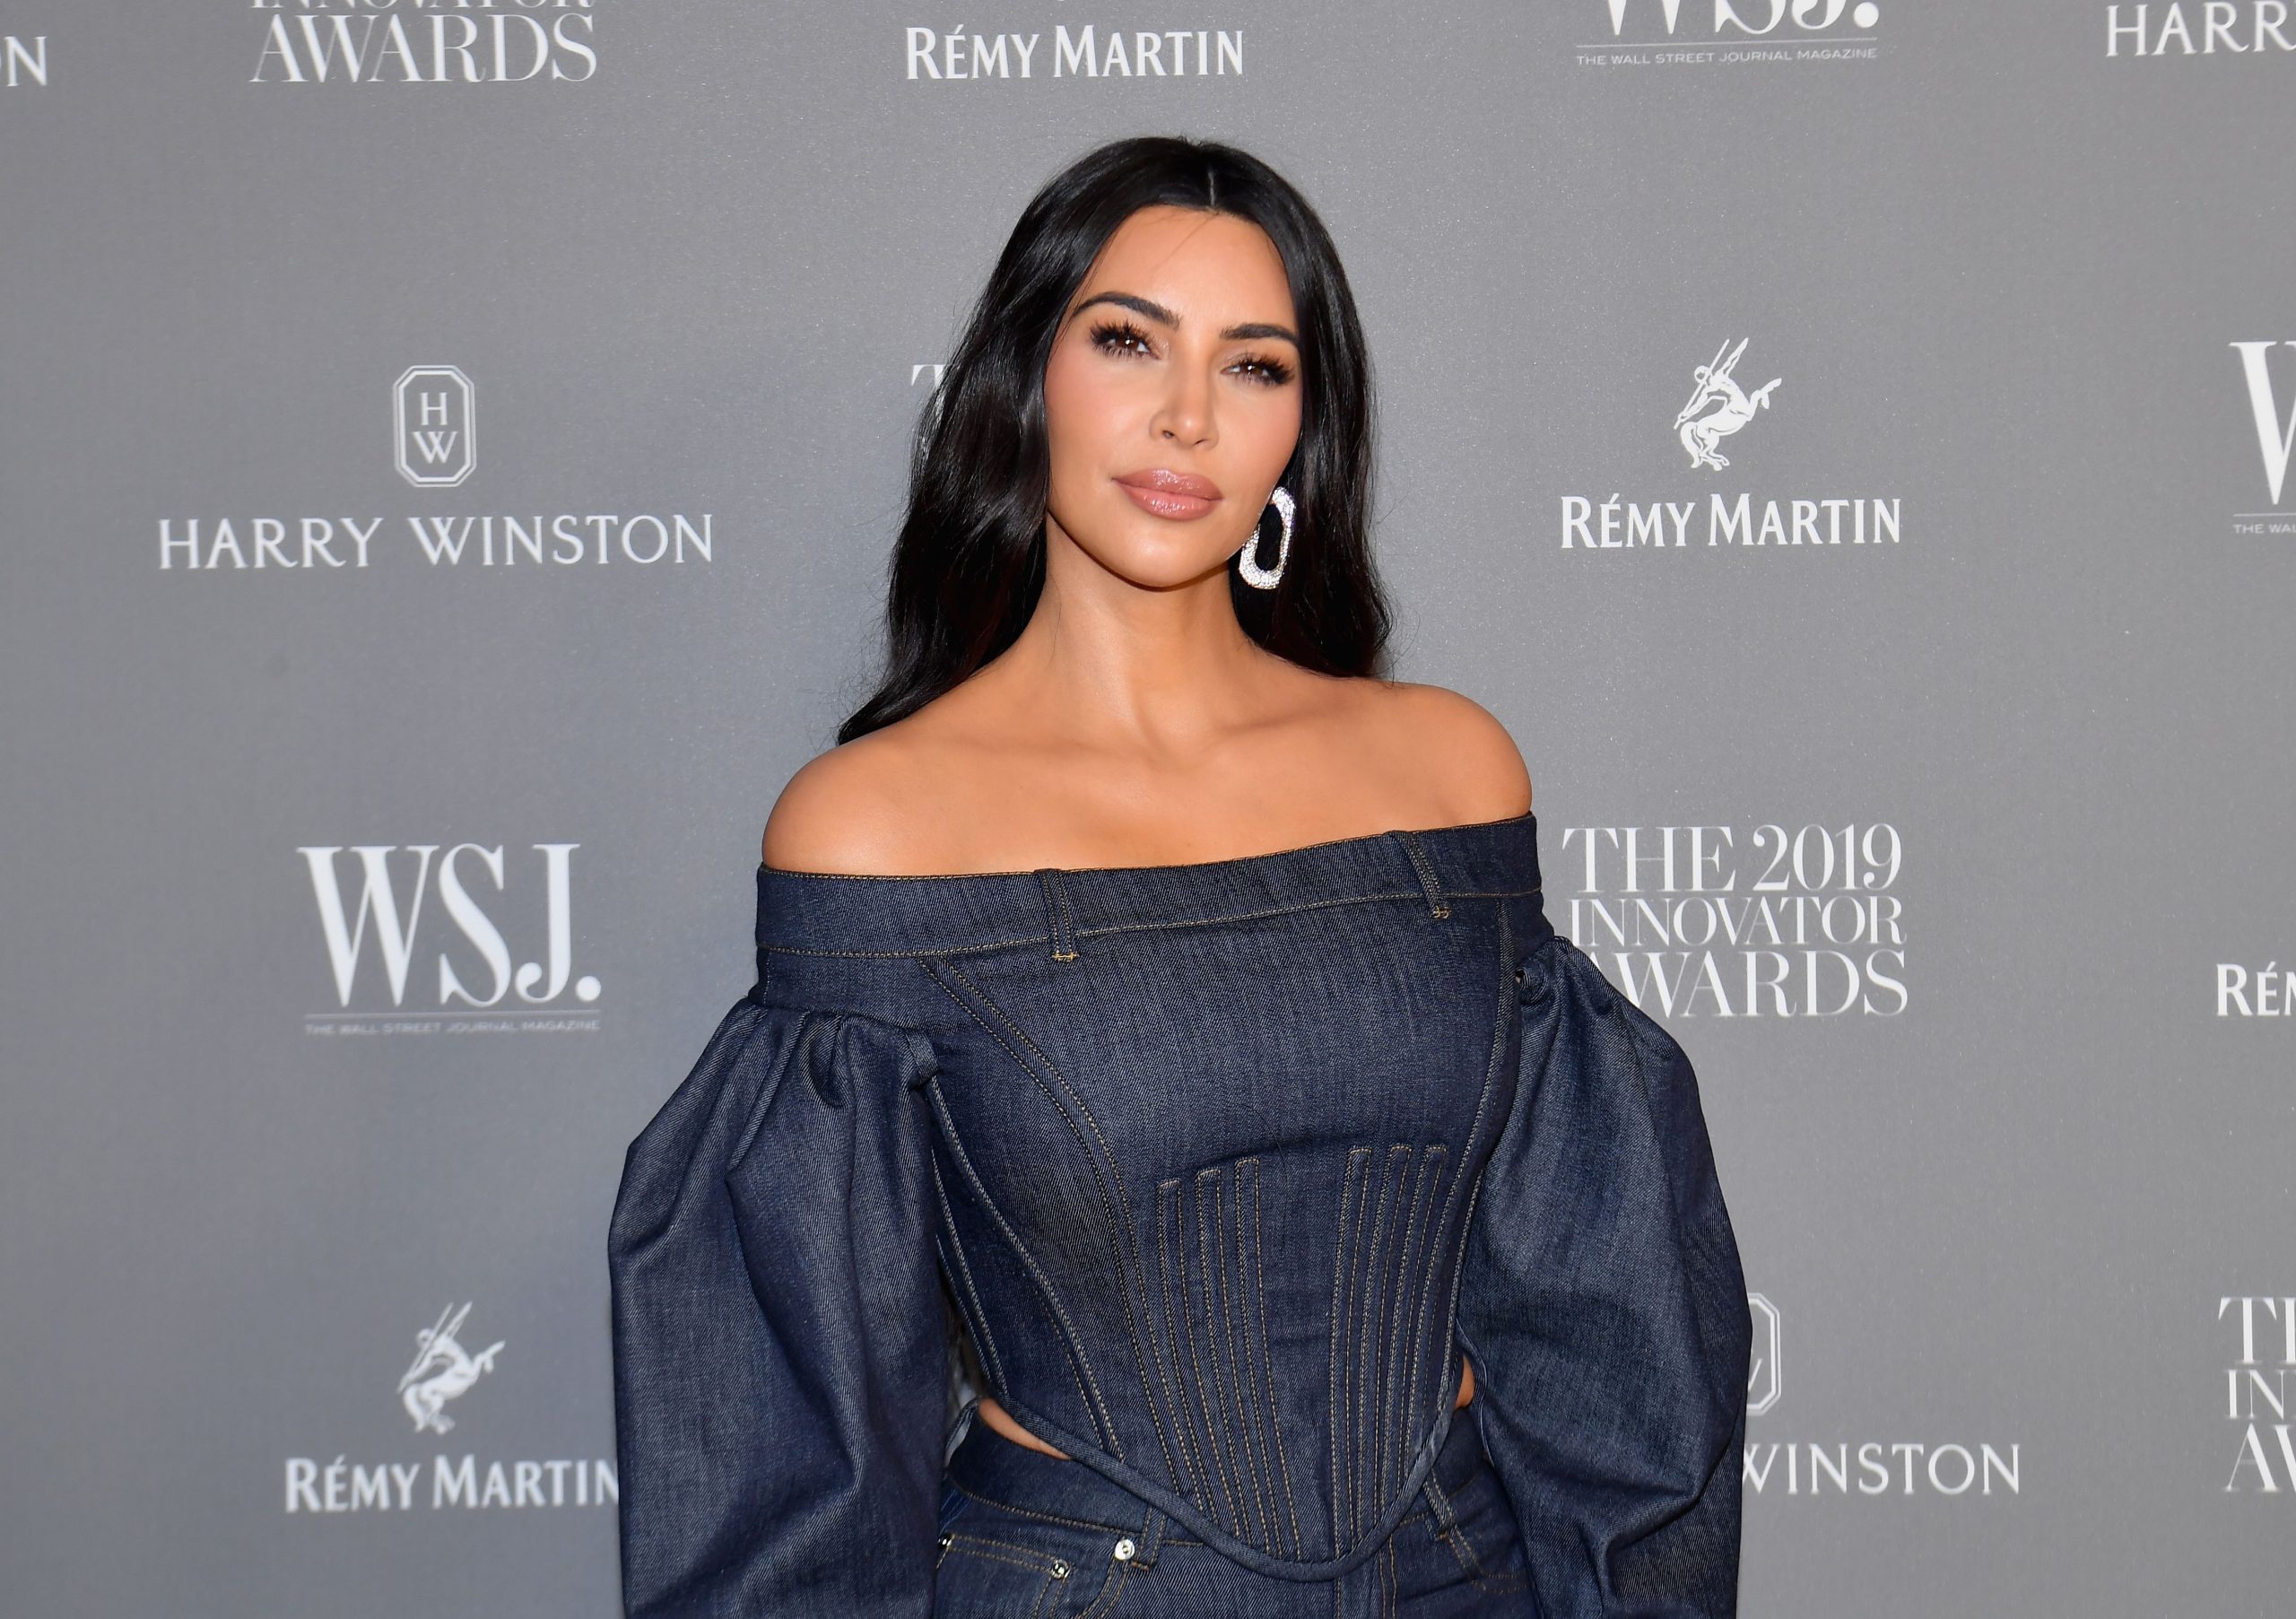 kim-kardashian-trolled-again-for-claiming-her-beauty-standards-are-attainable-netizens-say-attainable-my-a-easterneye